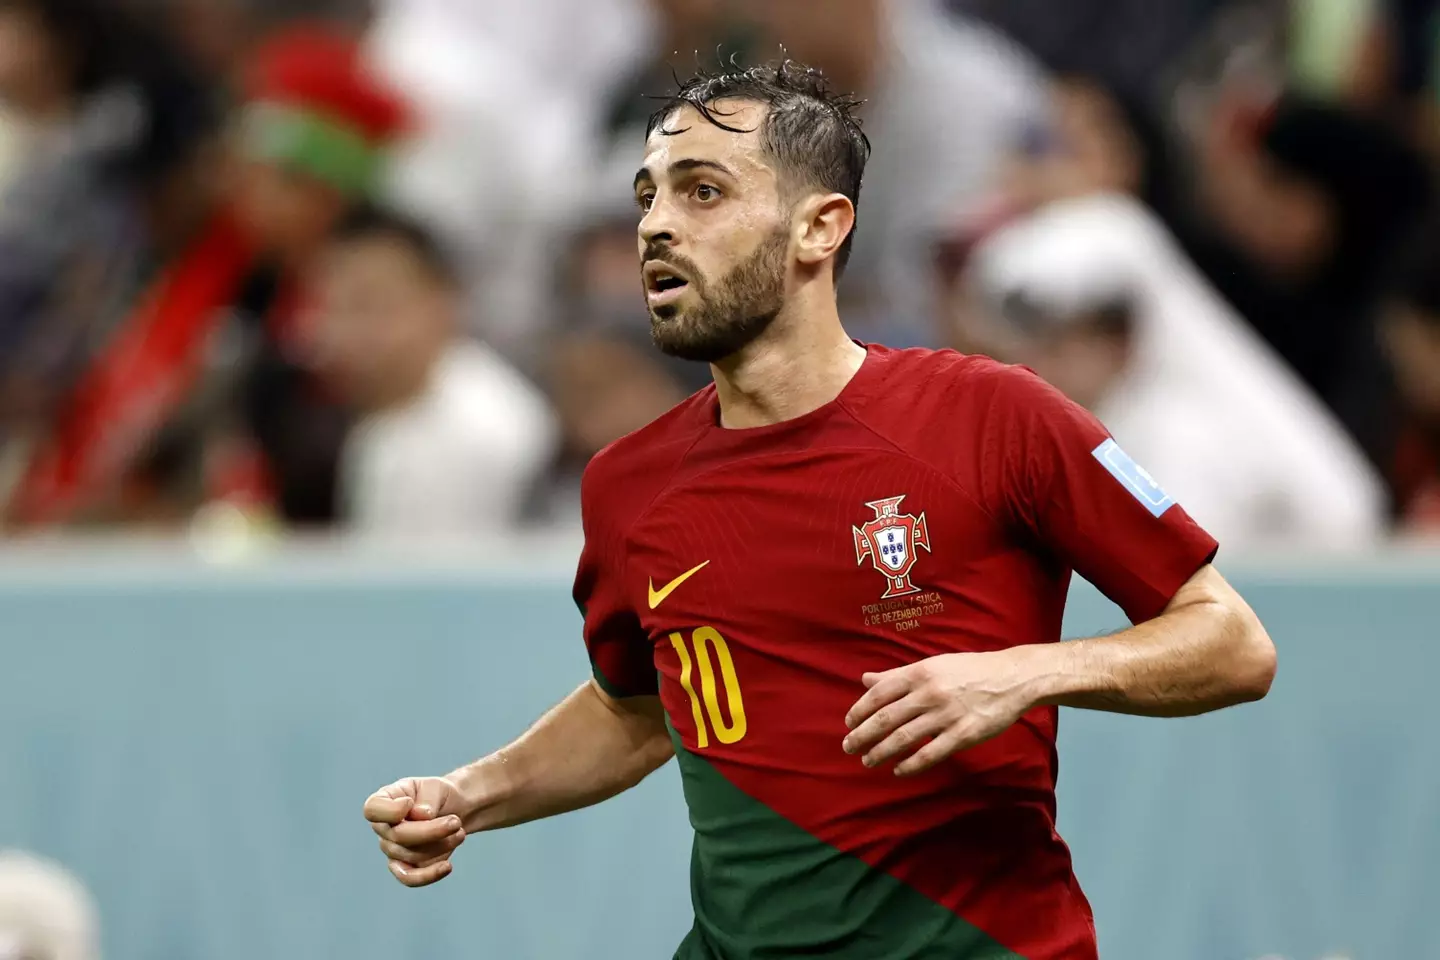 Manchester City star Bernardo Silva is currently representing Portugal at the World Cup in Qatar.